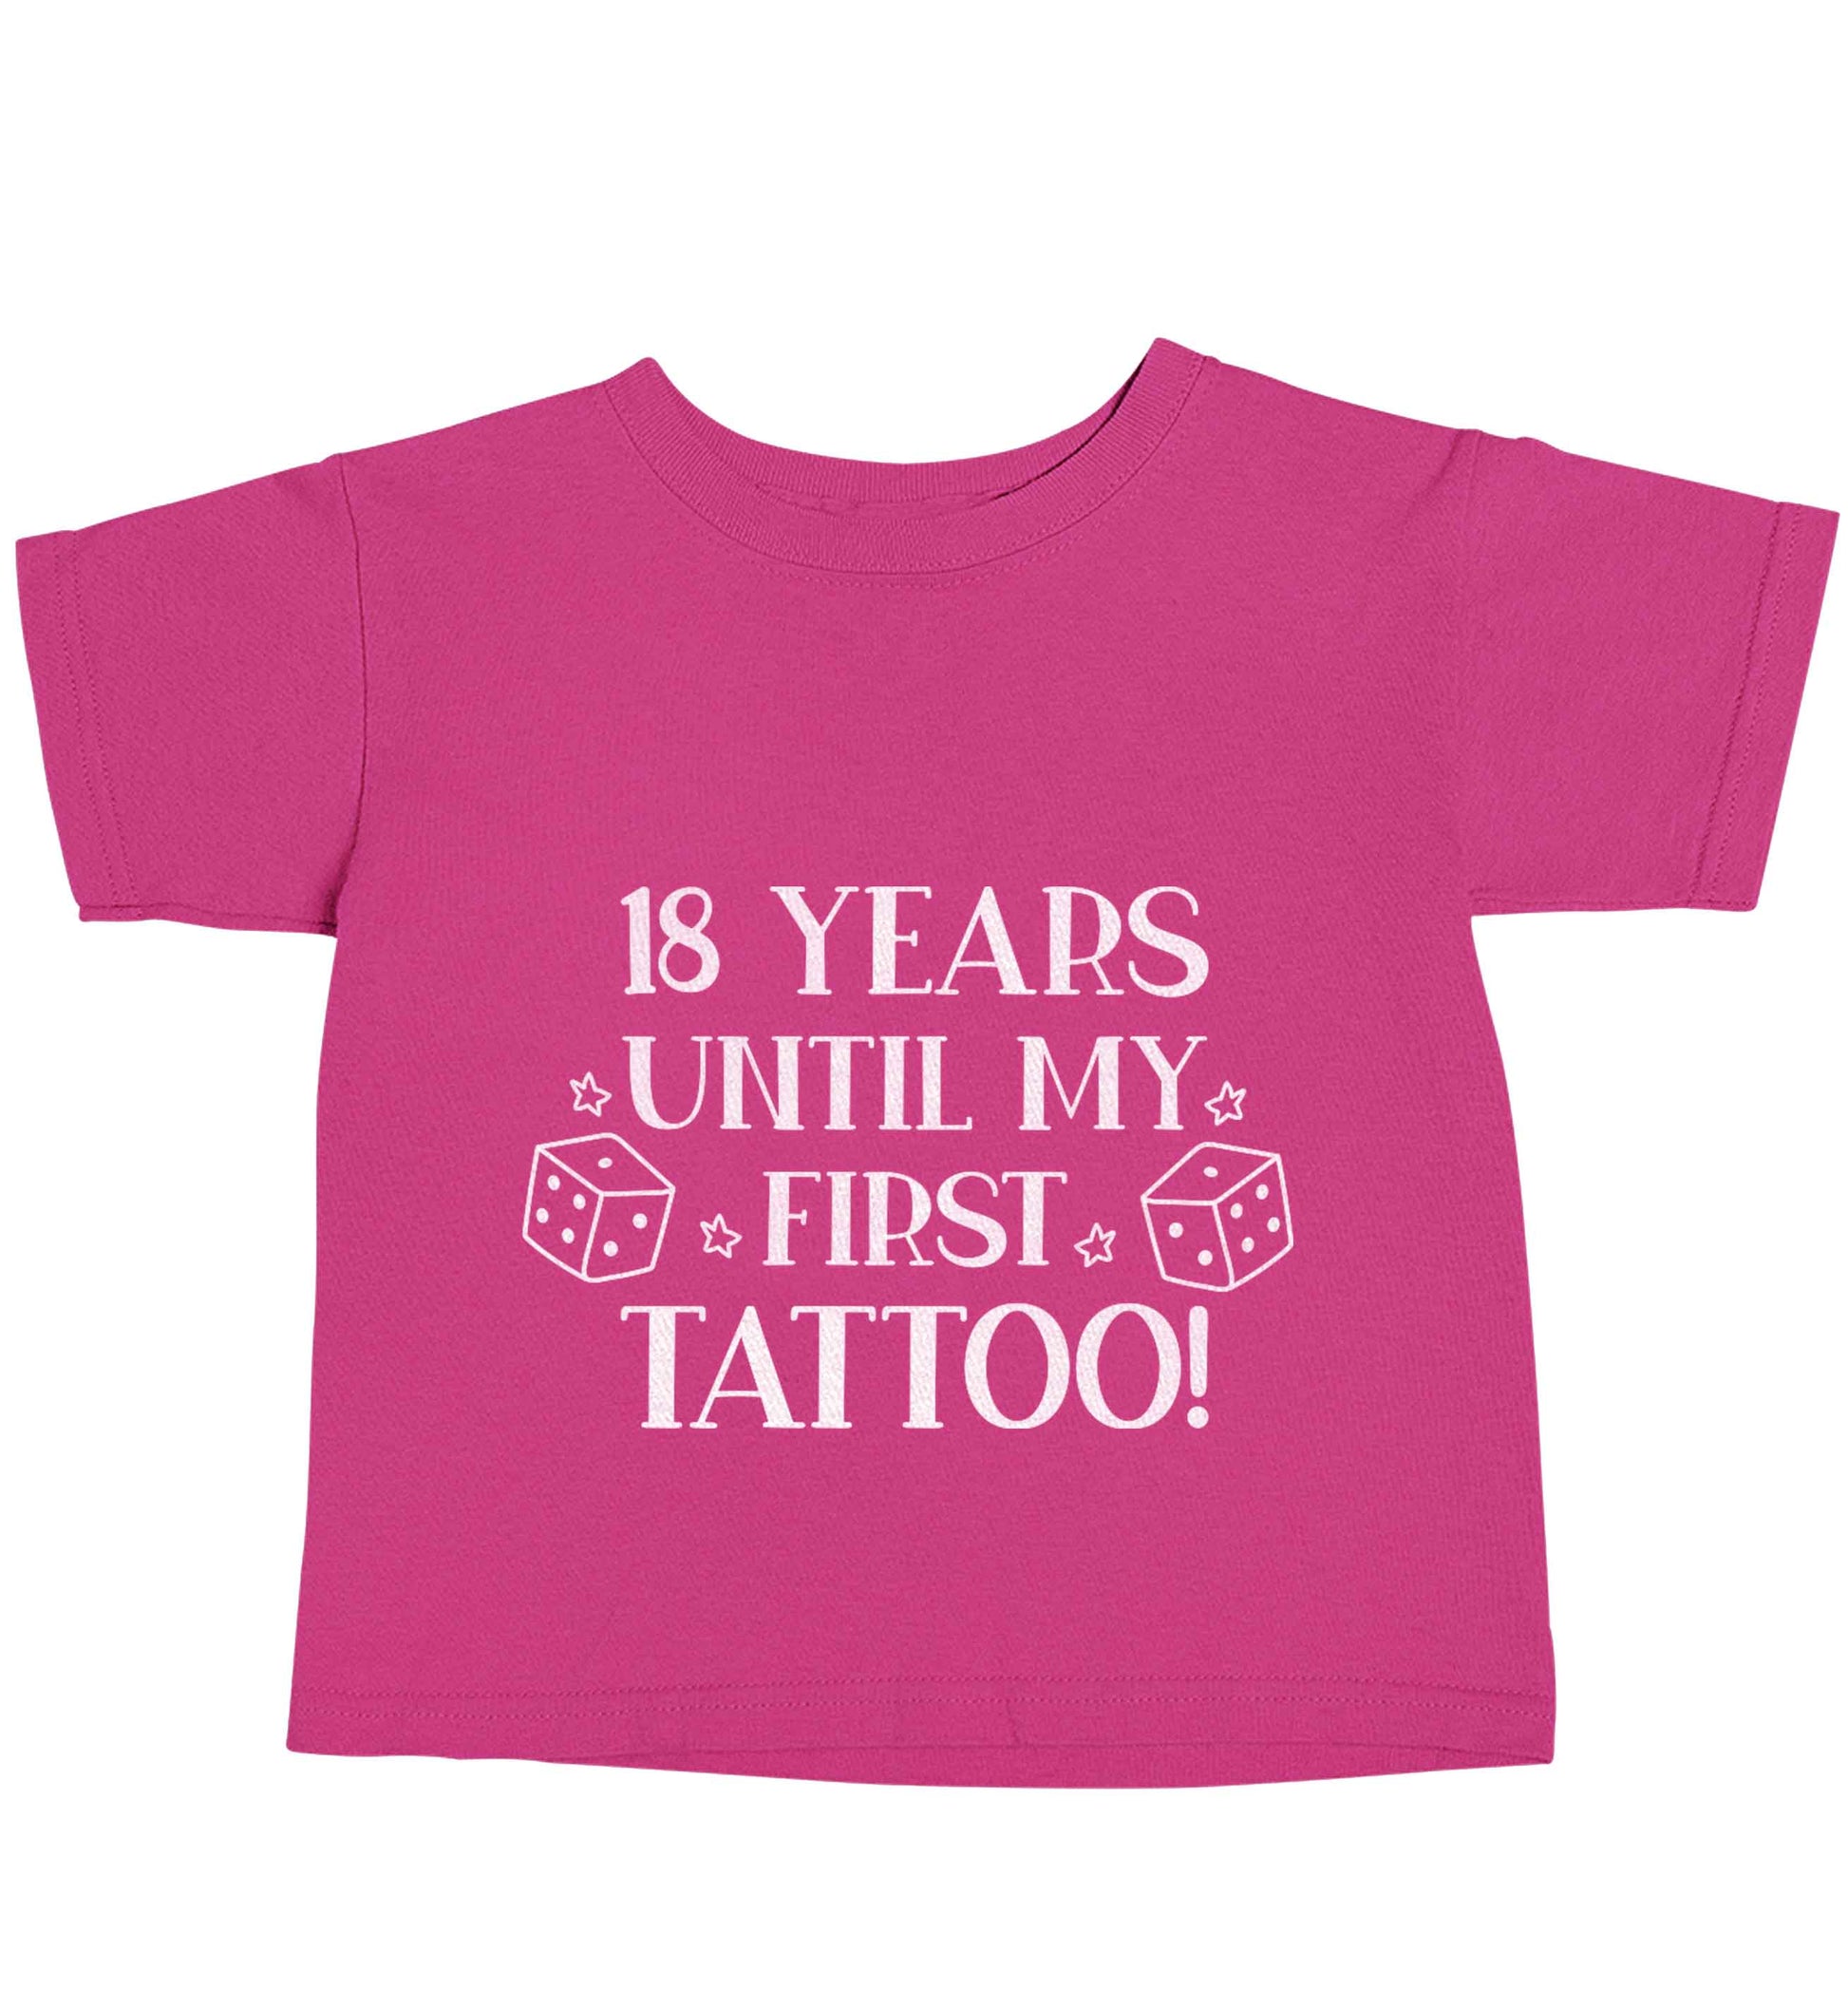 18 Years Until my First Tattoo pink baby toddler Tshirt 2 Years